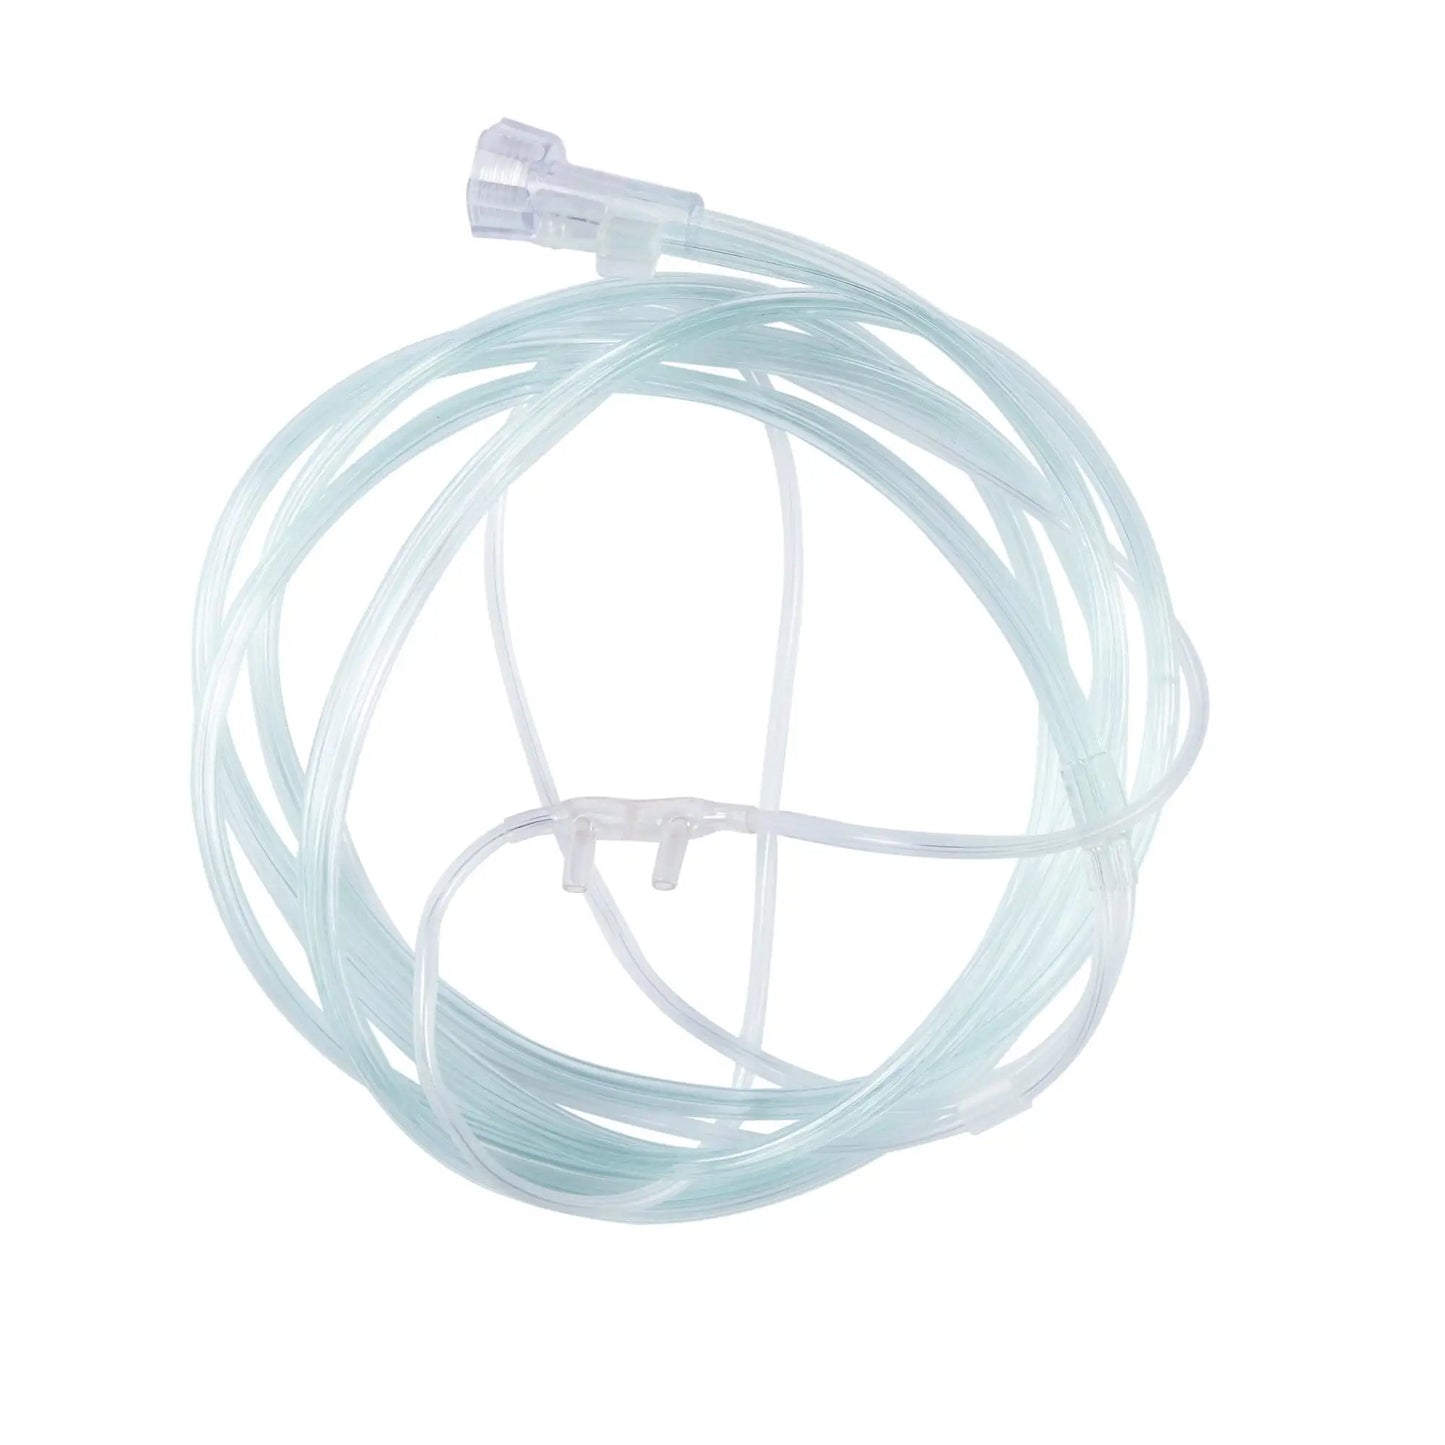 McKesson ETCO2 Nasal Sampling Cannula with O2, Female Luer, Clear